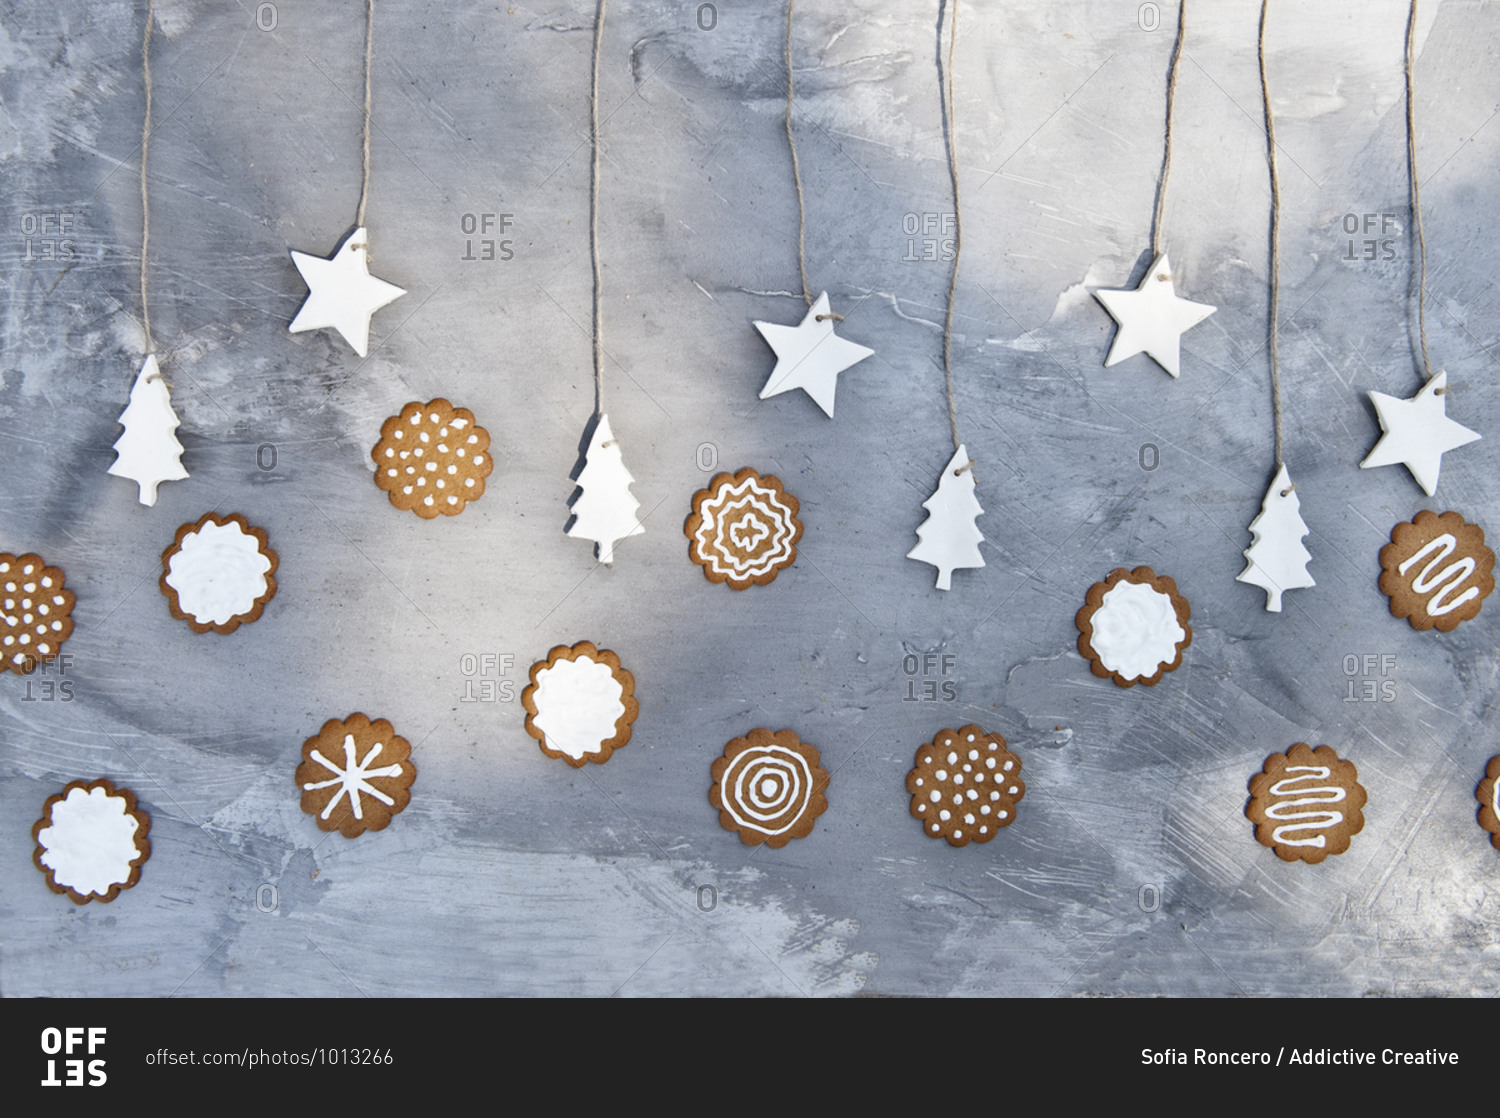 Plate with assorted gingerbread cookies with white icing placed near gray wall decorated with craft star and tree shaped paper items